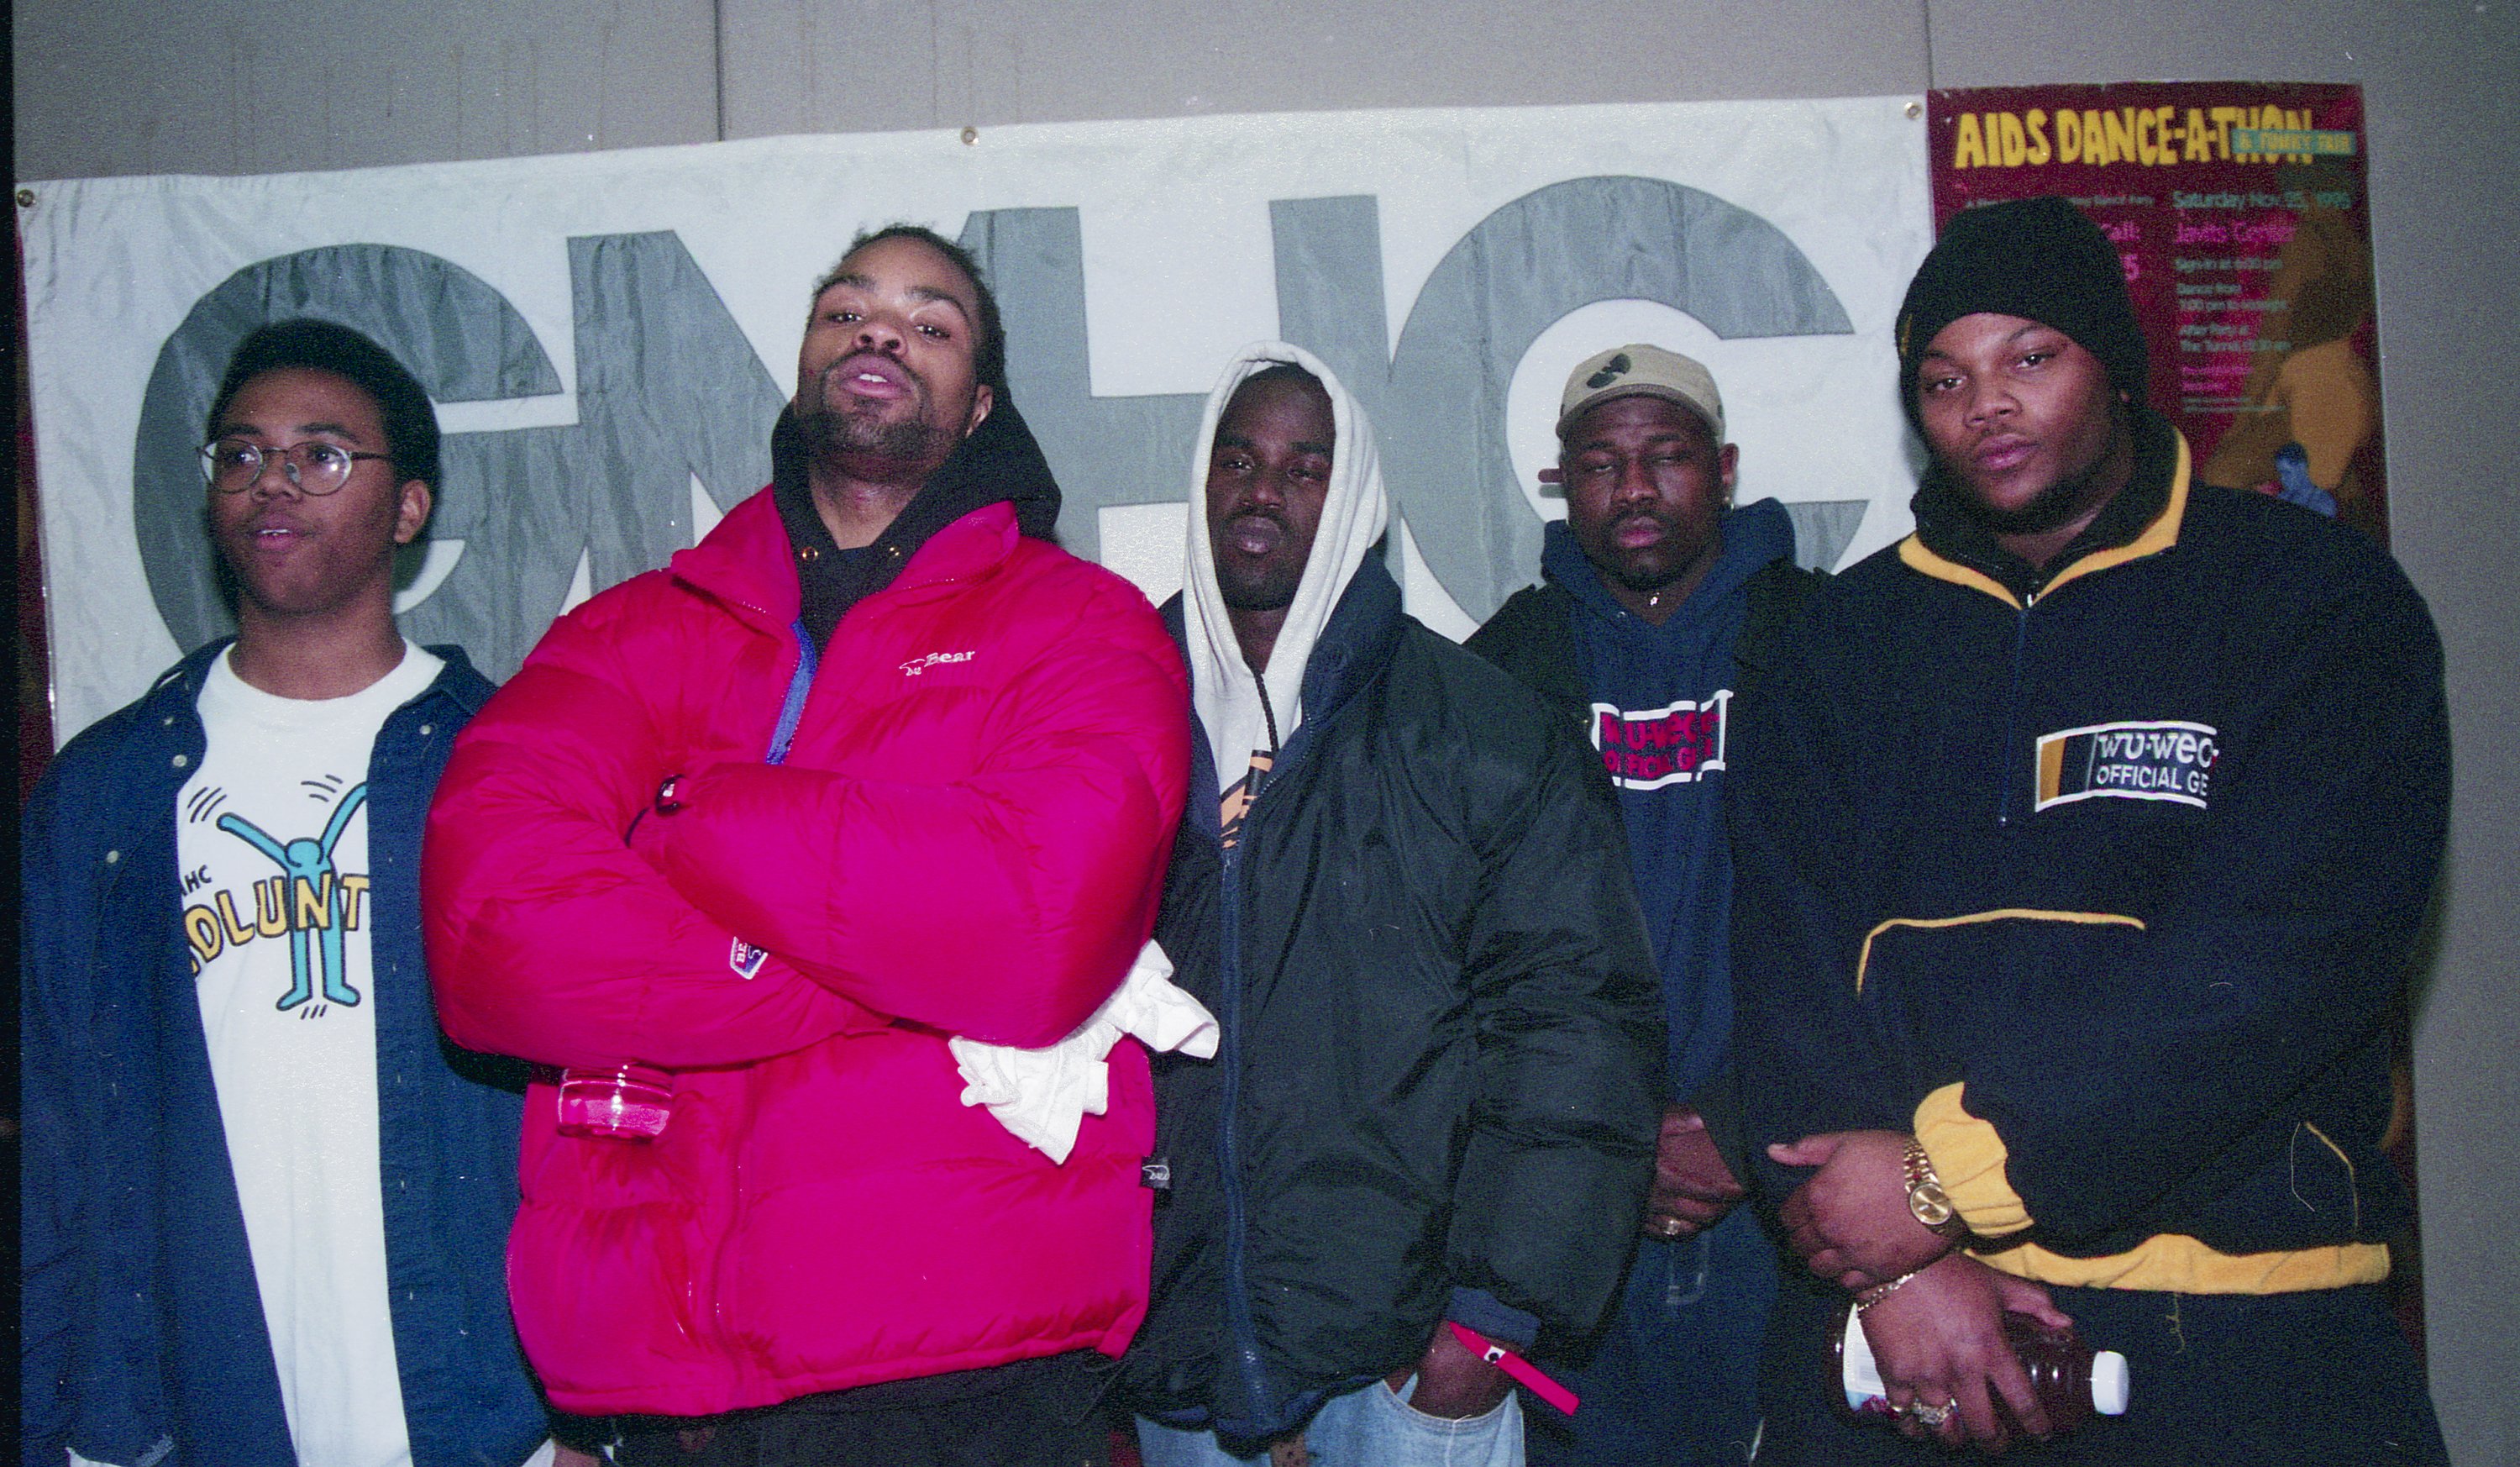 Members of the Wu Tang Clan pose at the GMHC Dance A Thon in November 1995, in New York City | Source: Getty Images